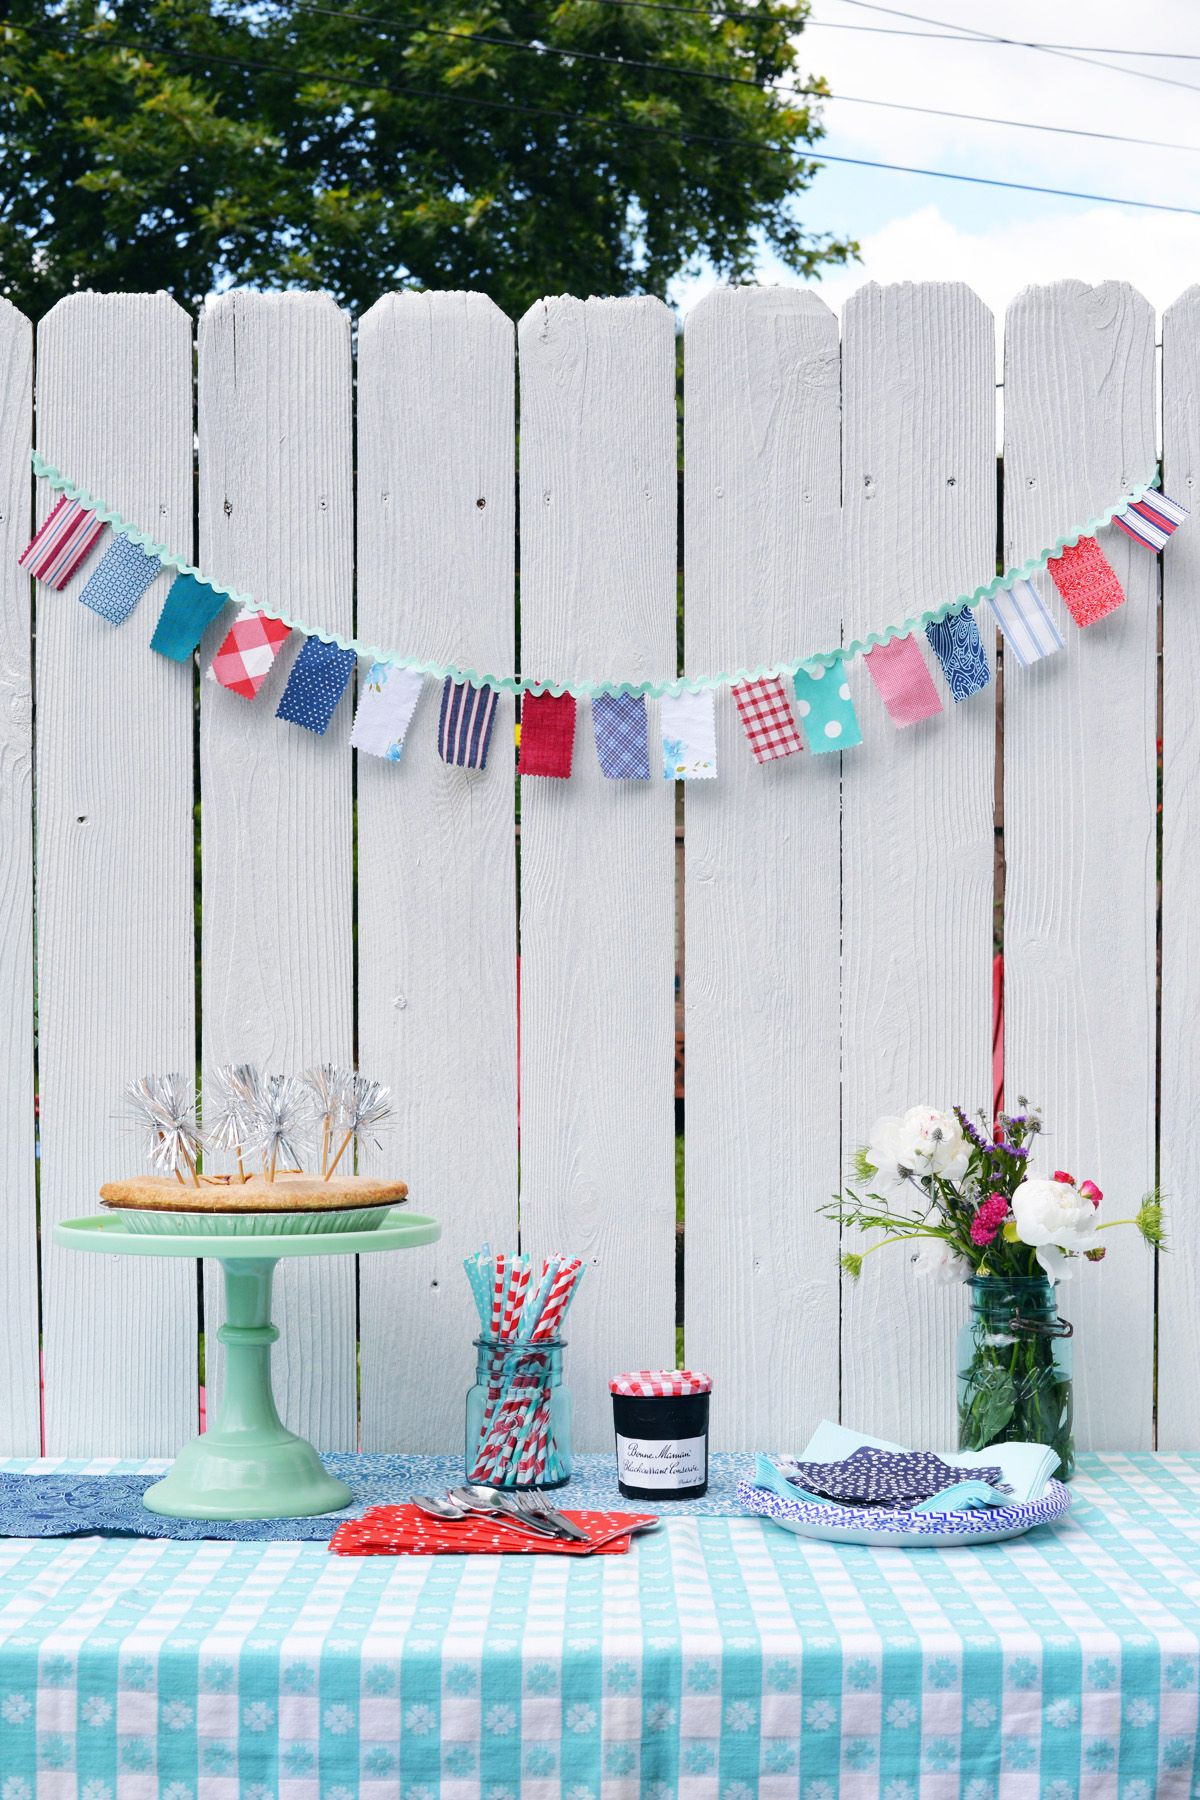 DIY Outdoor Banner
 DIY Red White and Blue Fabric Garland